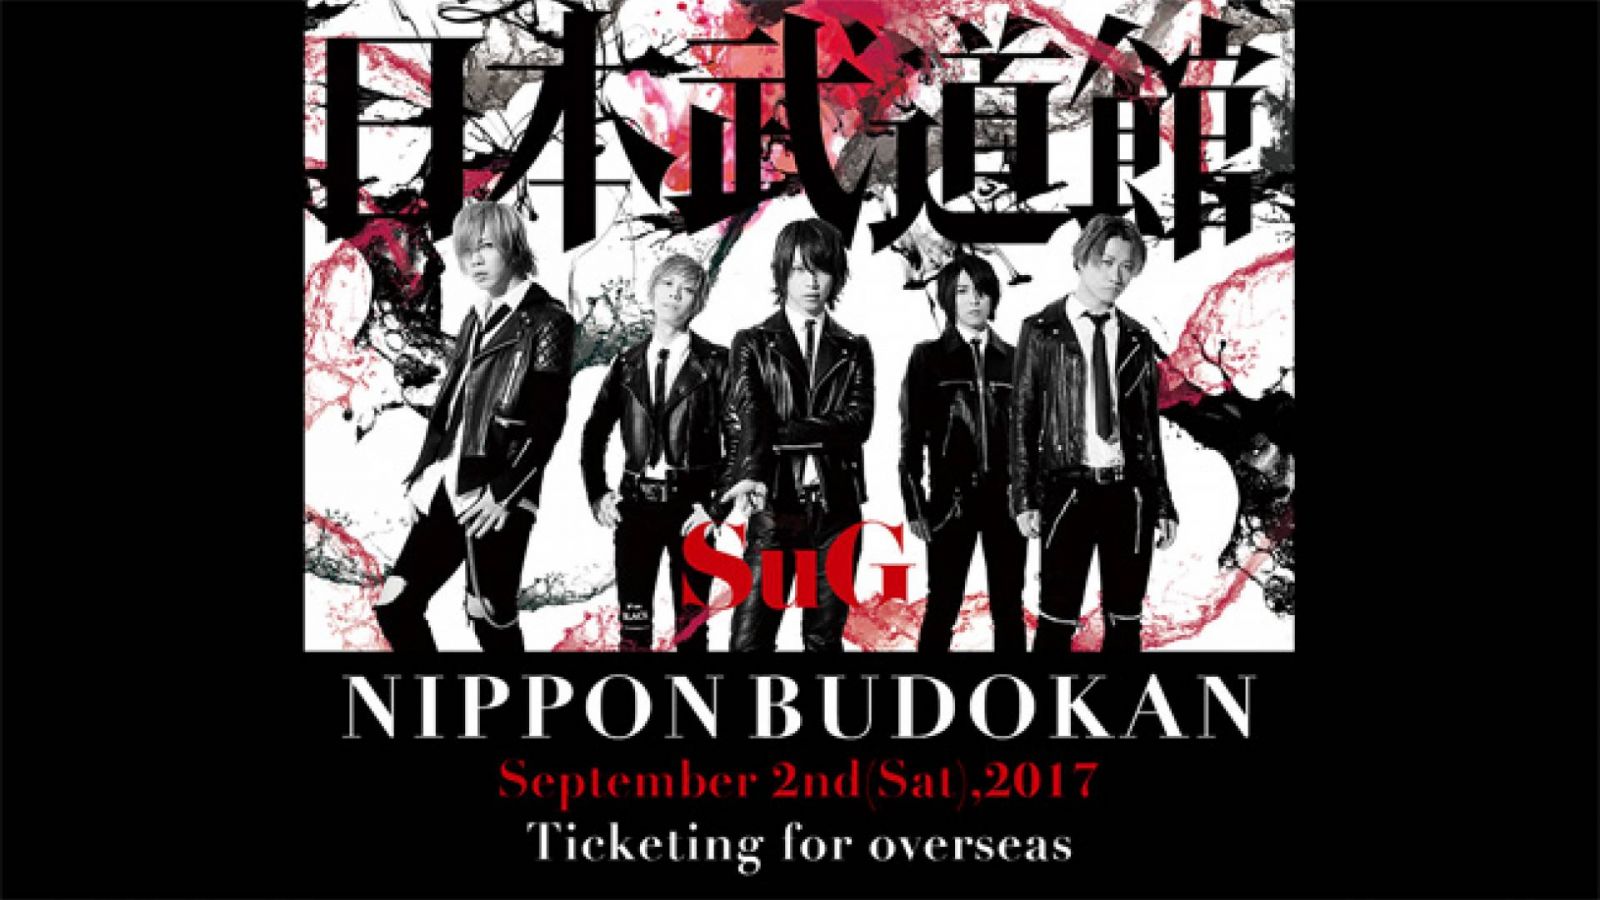 SuG Begins Overseas Ticket Sales for Nippon Budokan Live, Announces New EP © 2017 OFFICE WALKER, Fam Entertainment Co., Ltd